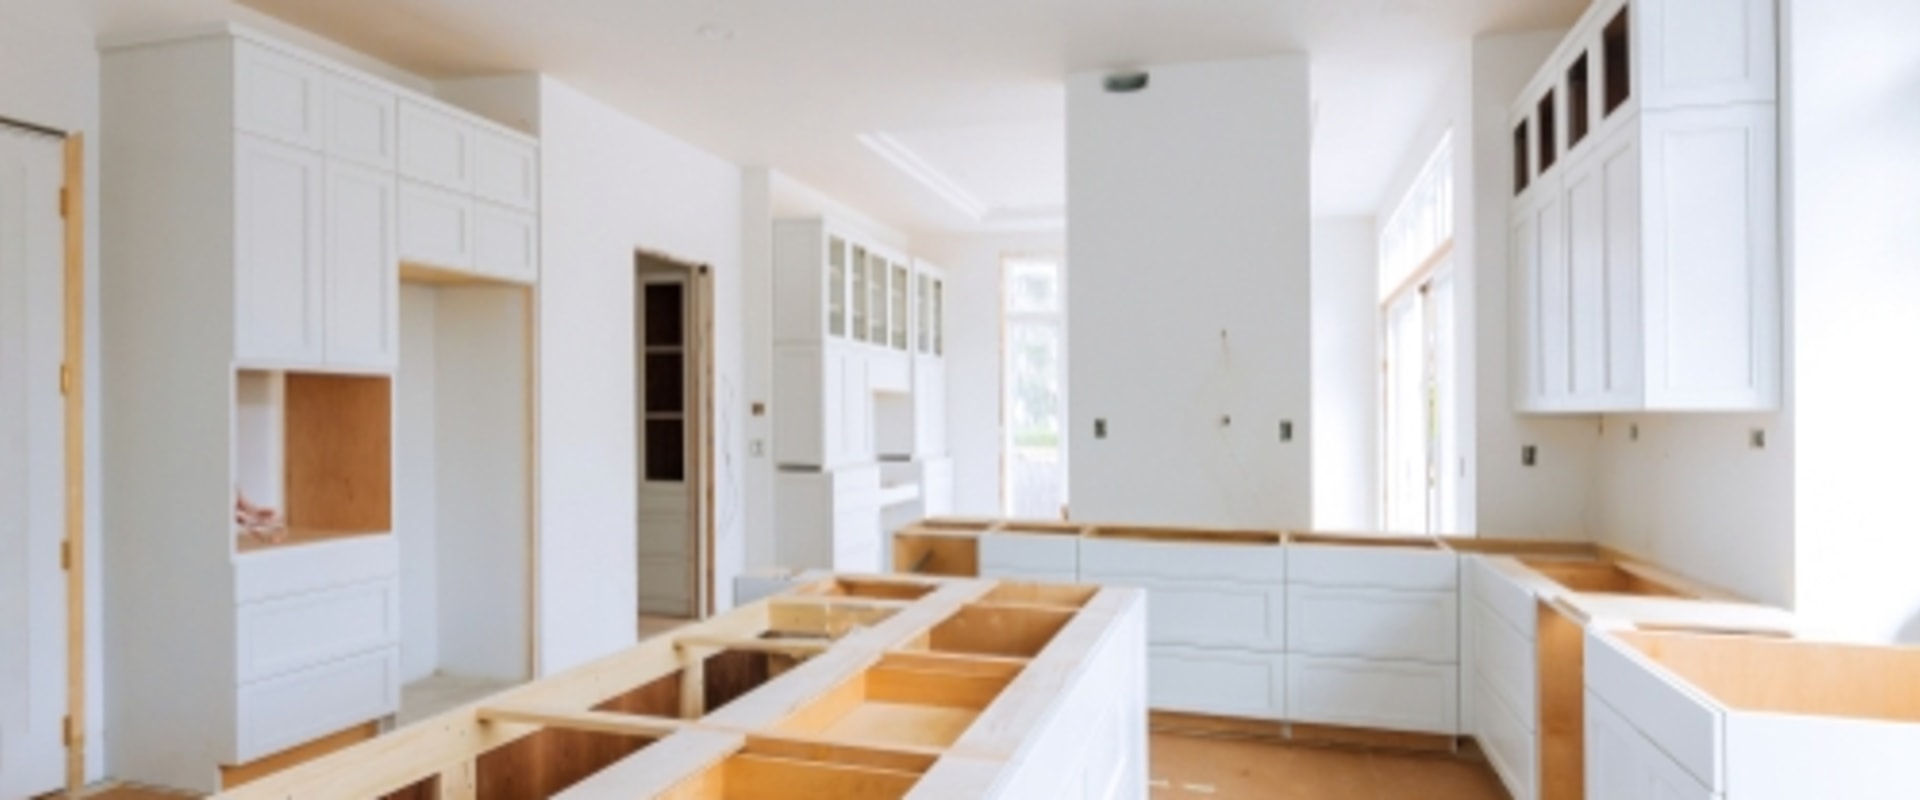 Revitalize And Repair: Home Remodeling Tips For Water Damage Restoration In Overland Park, KS